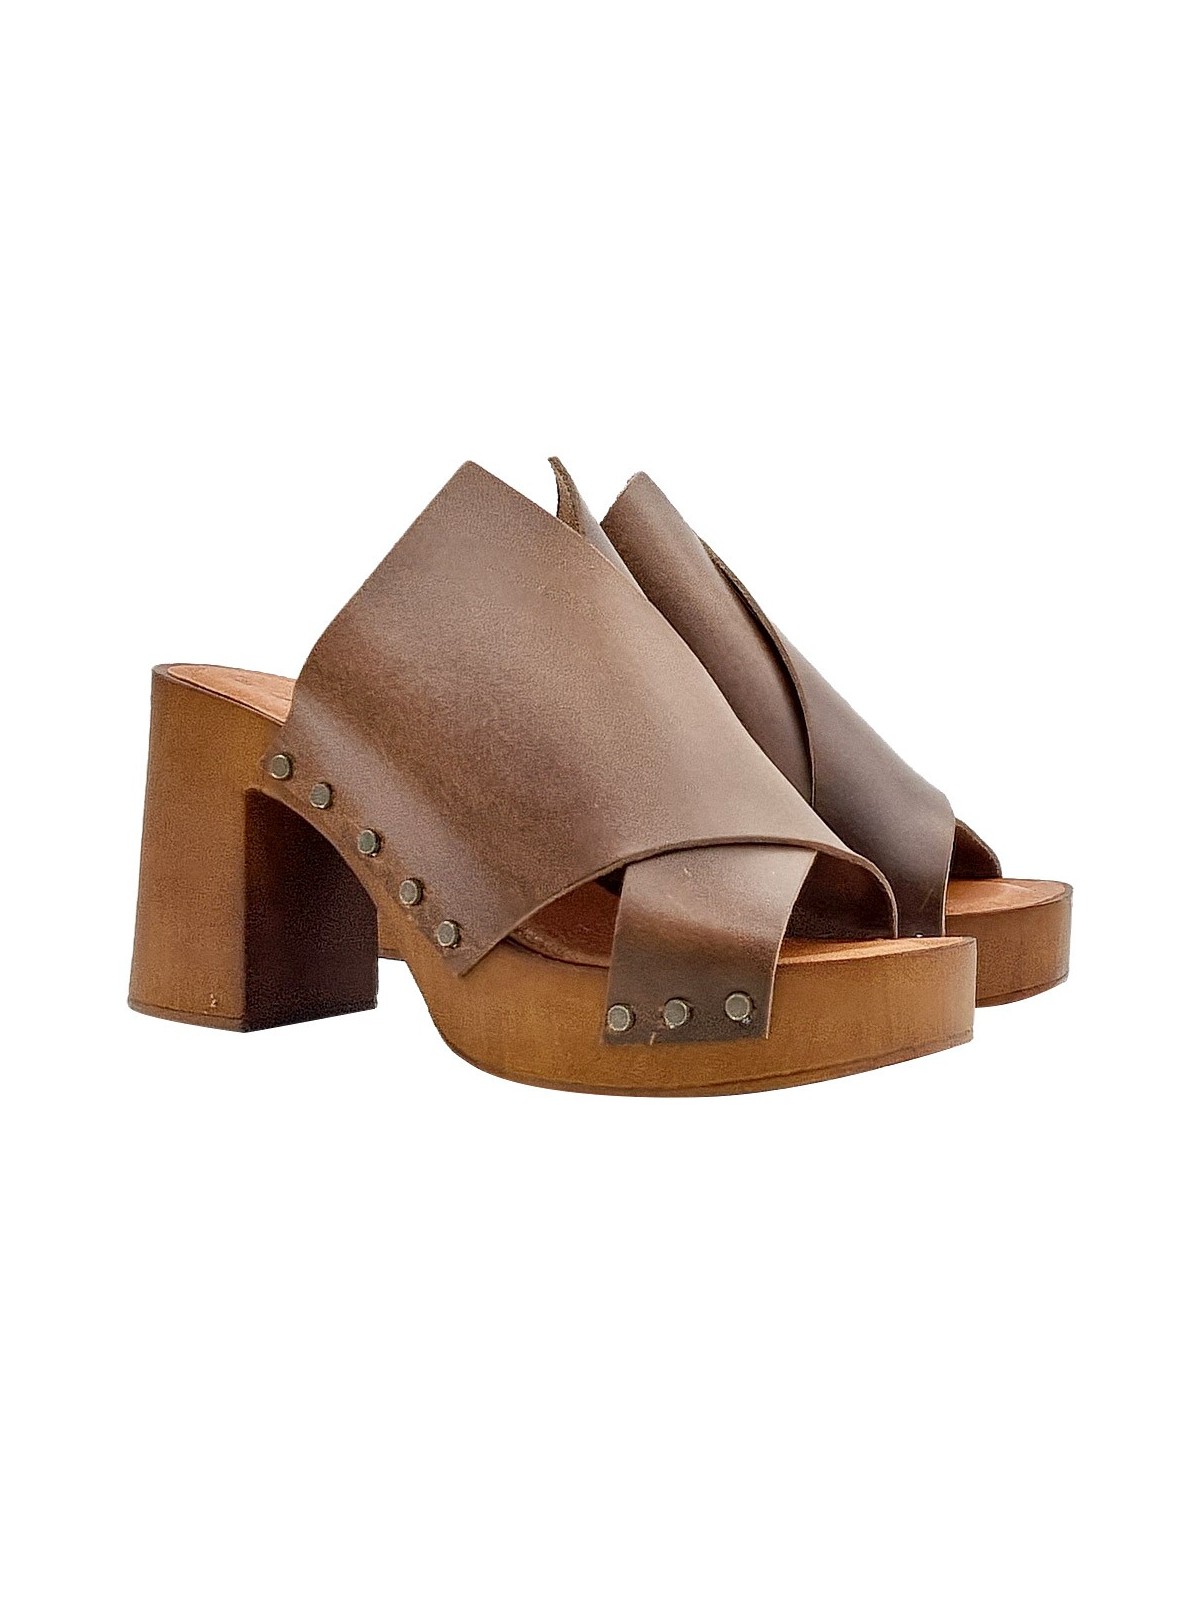 BROWN LEATHER CLOGS WITH 8.5 HEEL